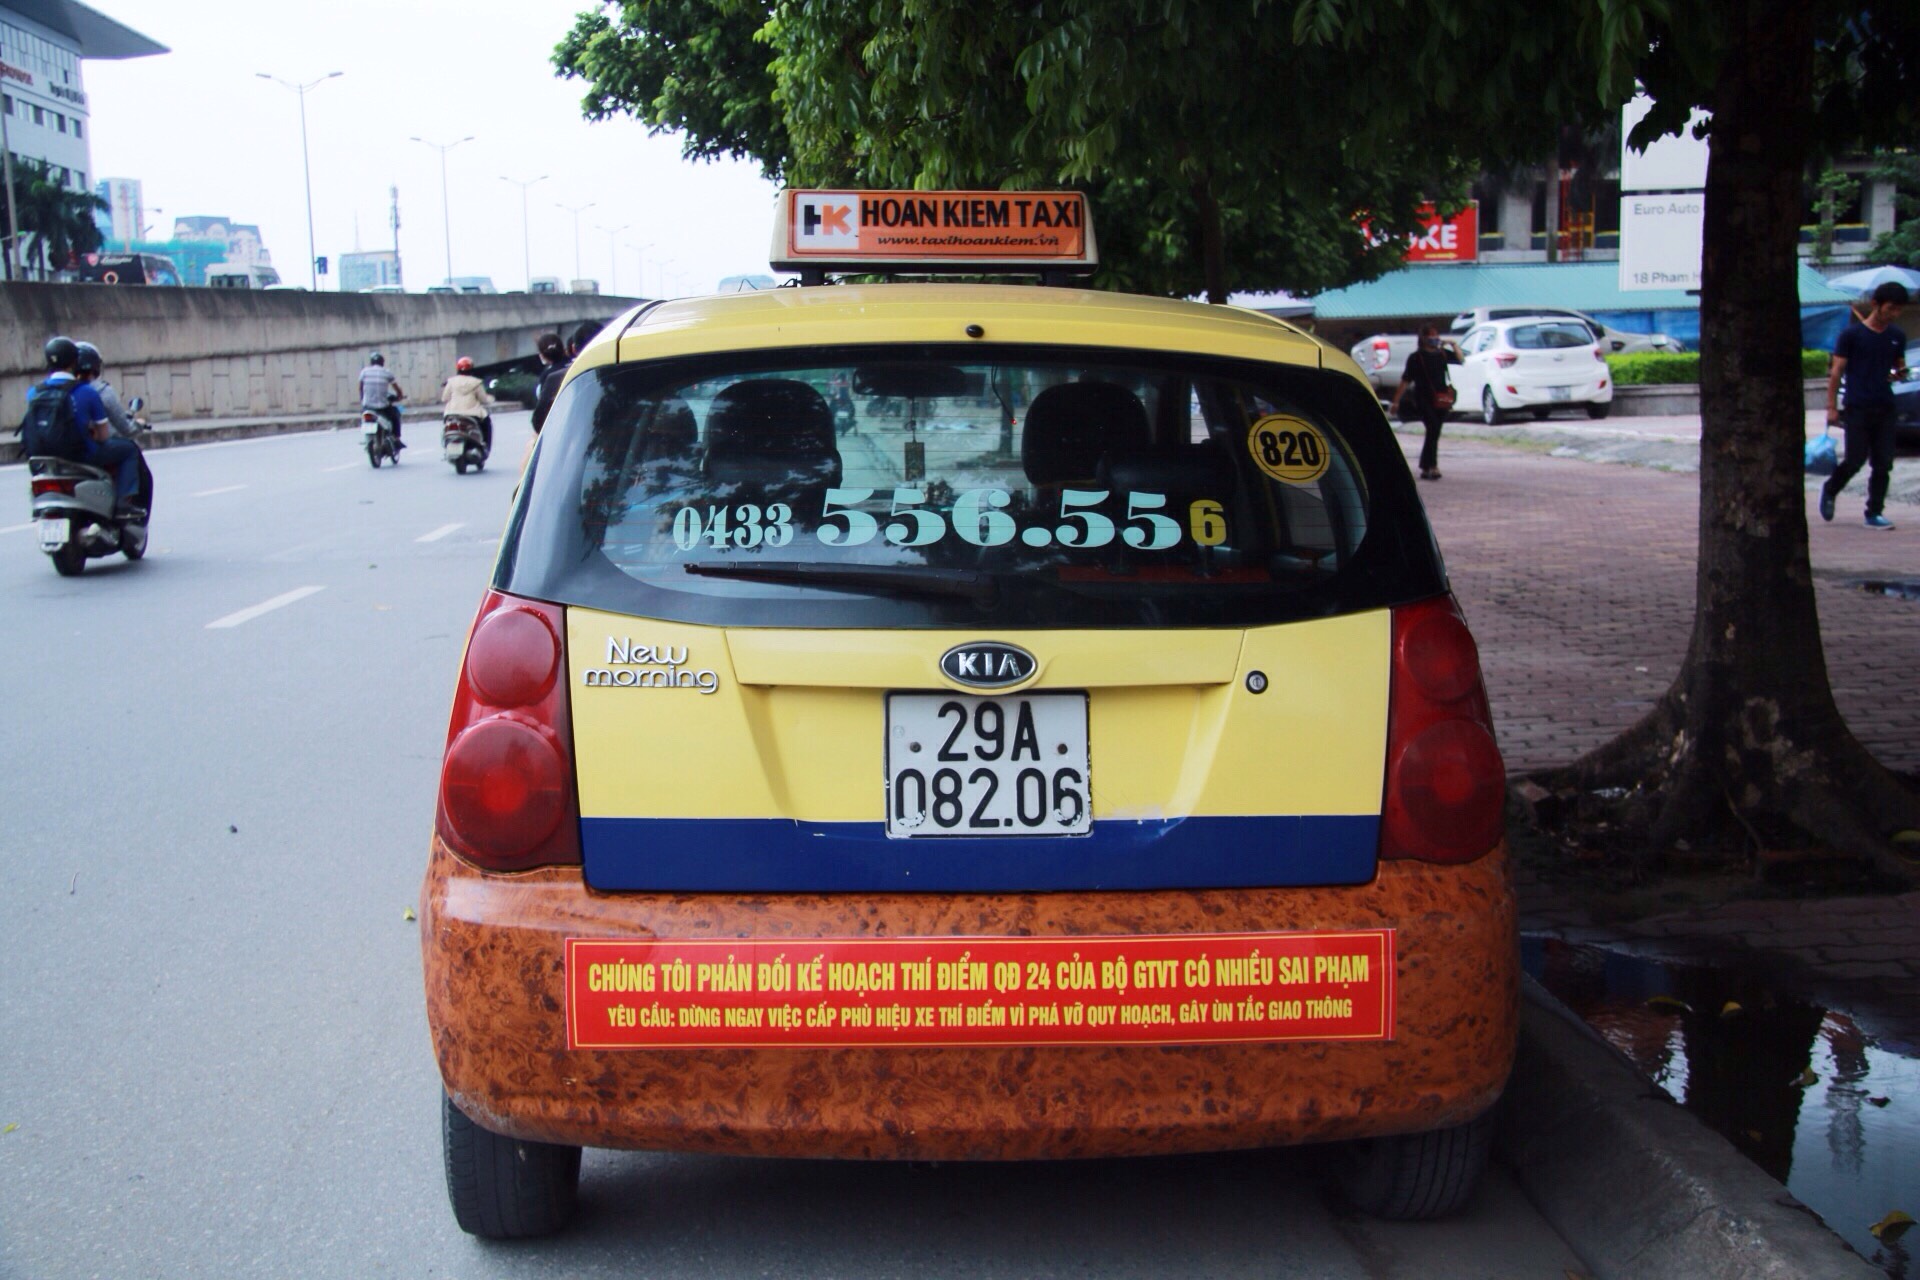 ​​Hanoi taxis protest Grab, Uber with bumper stickers